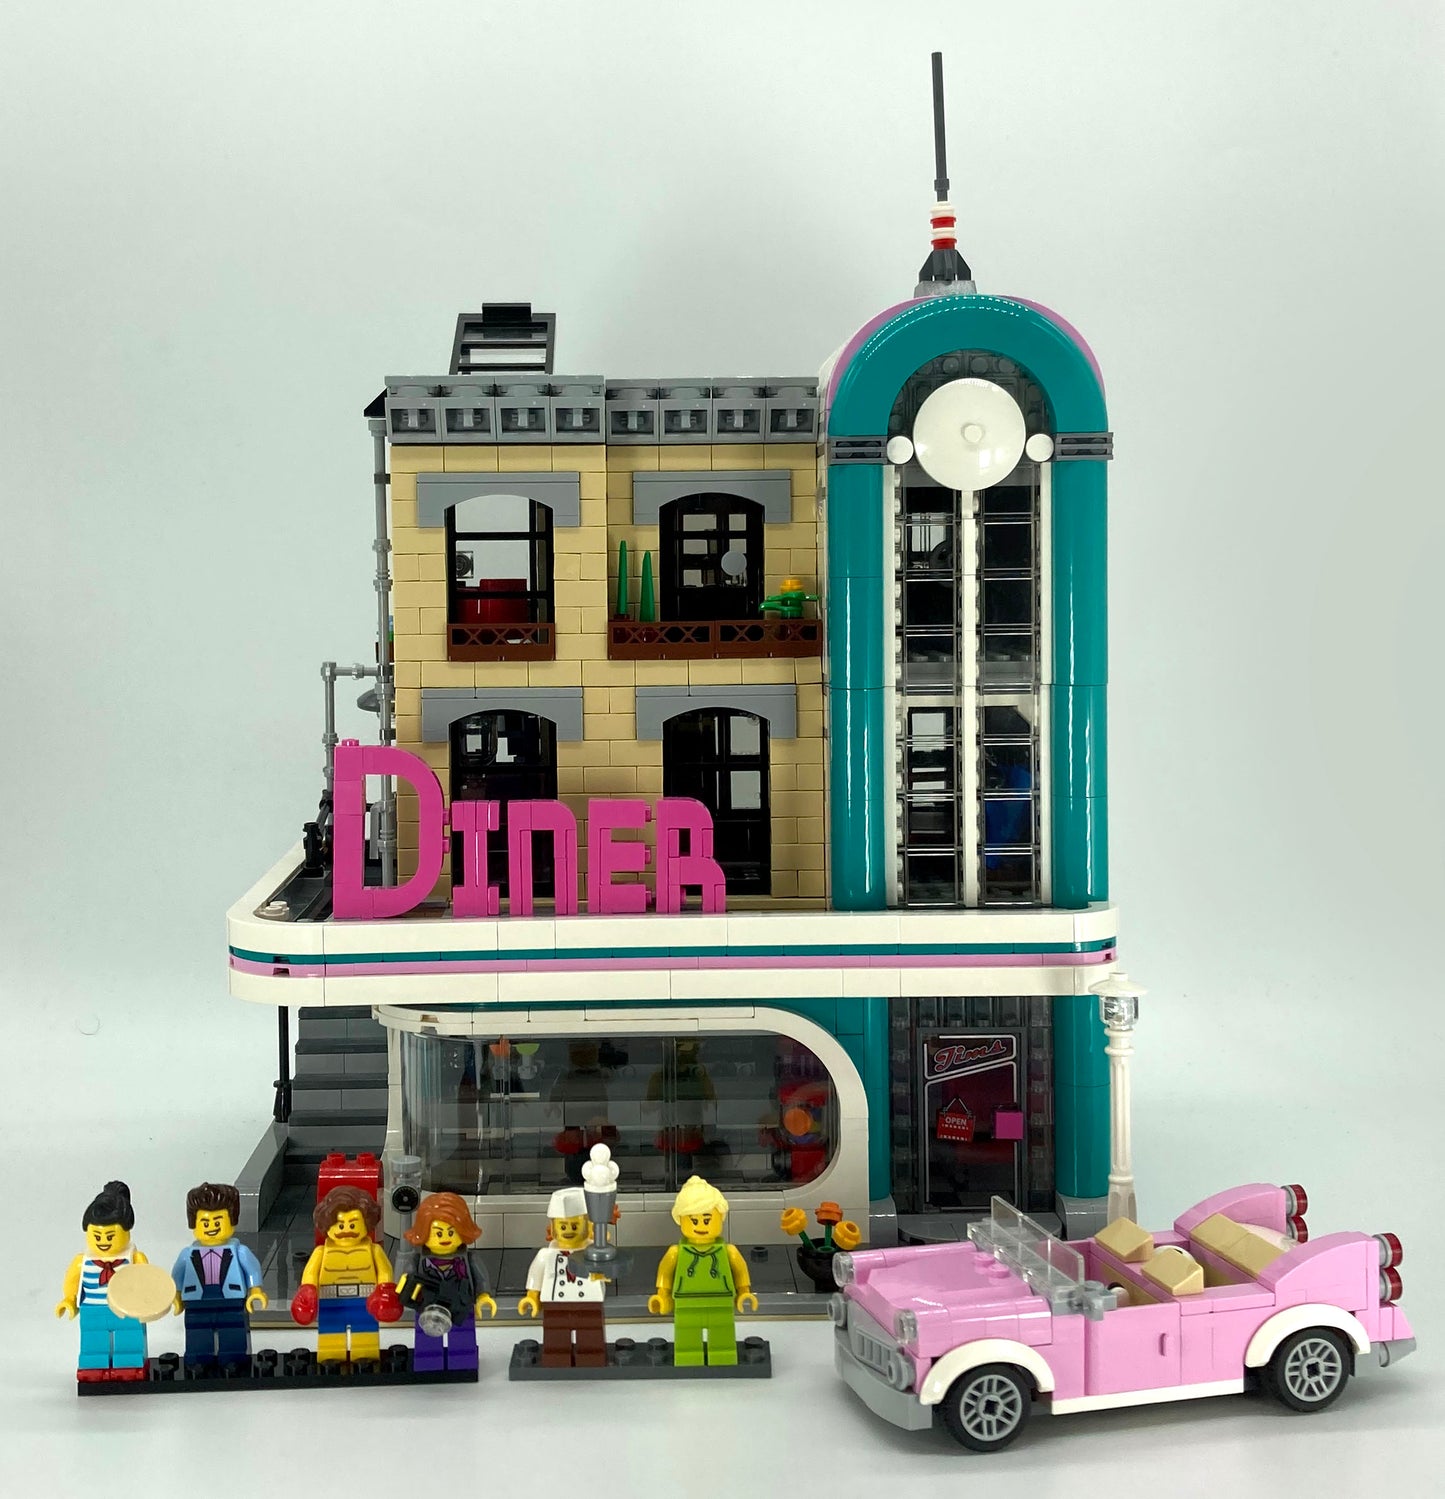 Used Set 10260 Downtown Diner (No Instruction Manual or Box)